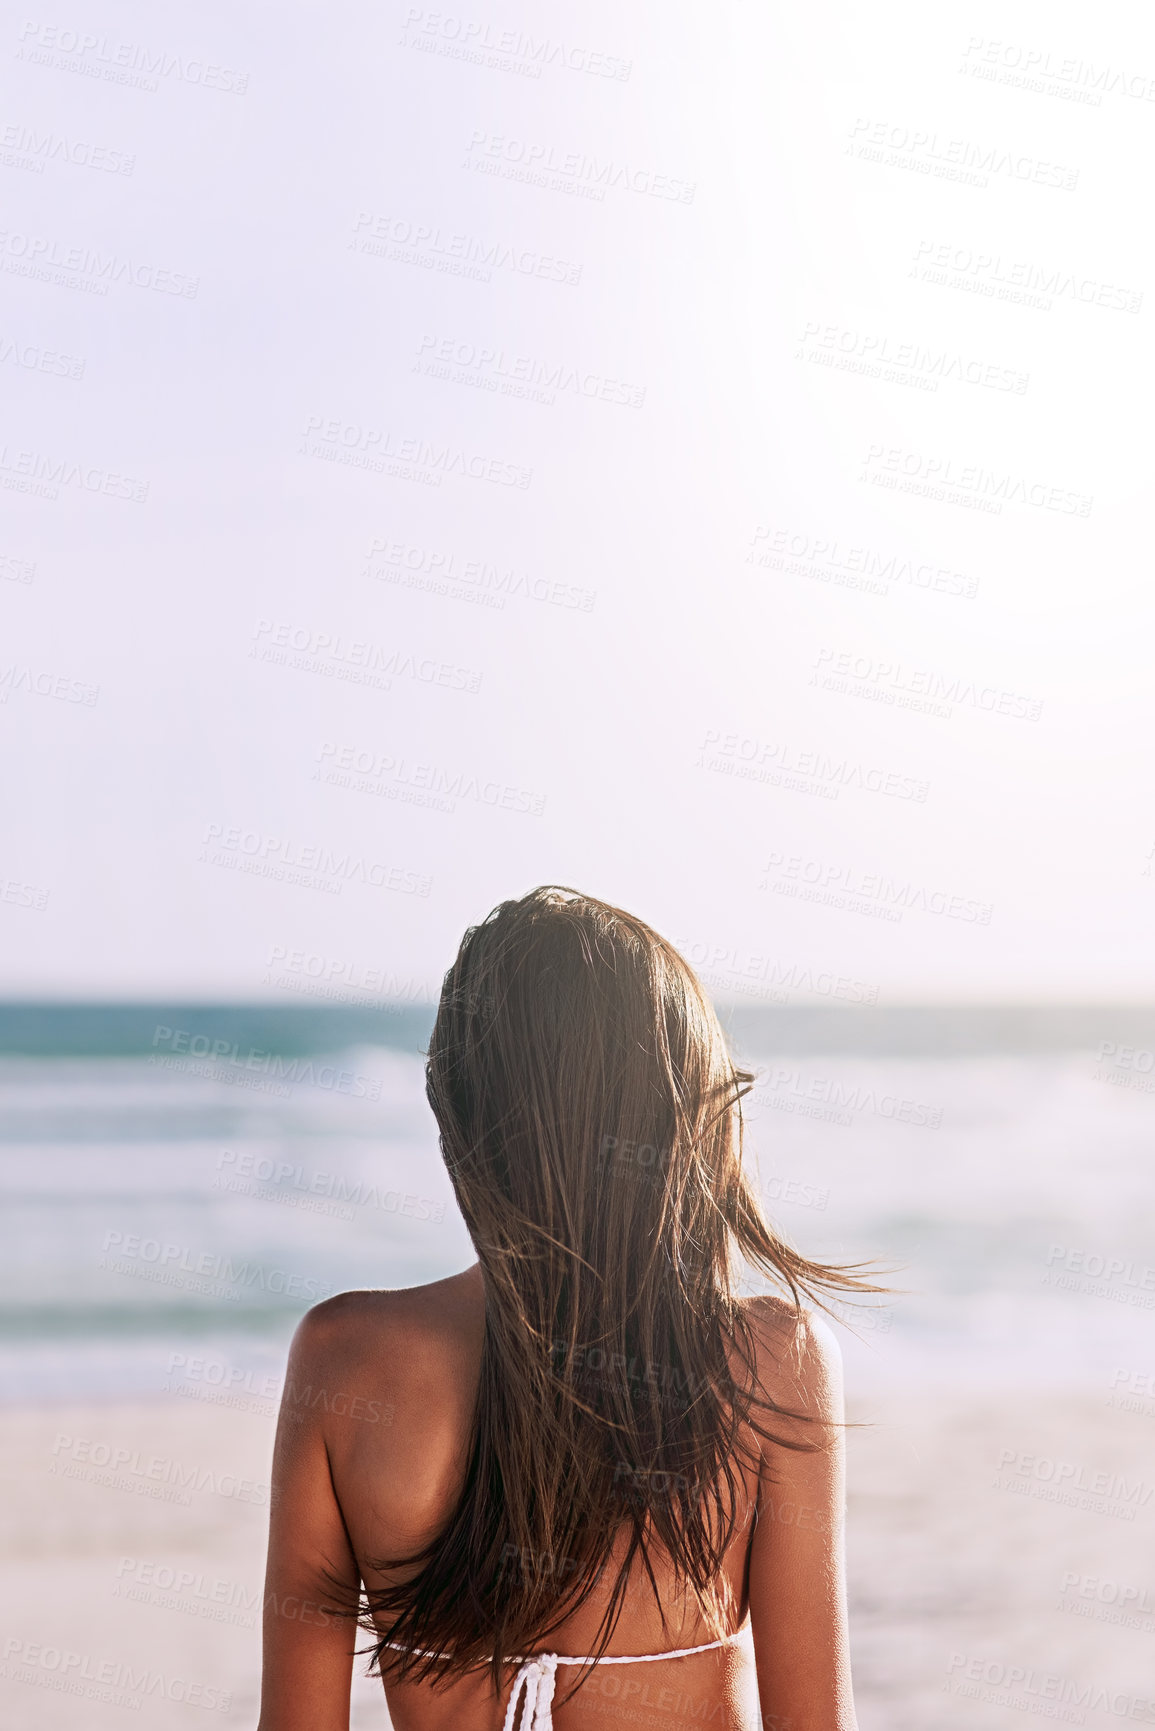 Buy stock photo Rearview shot of an unrecognizable young woman at the beach